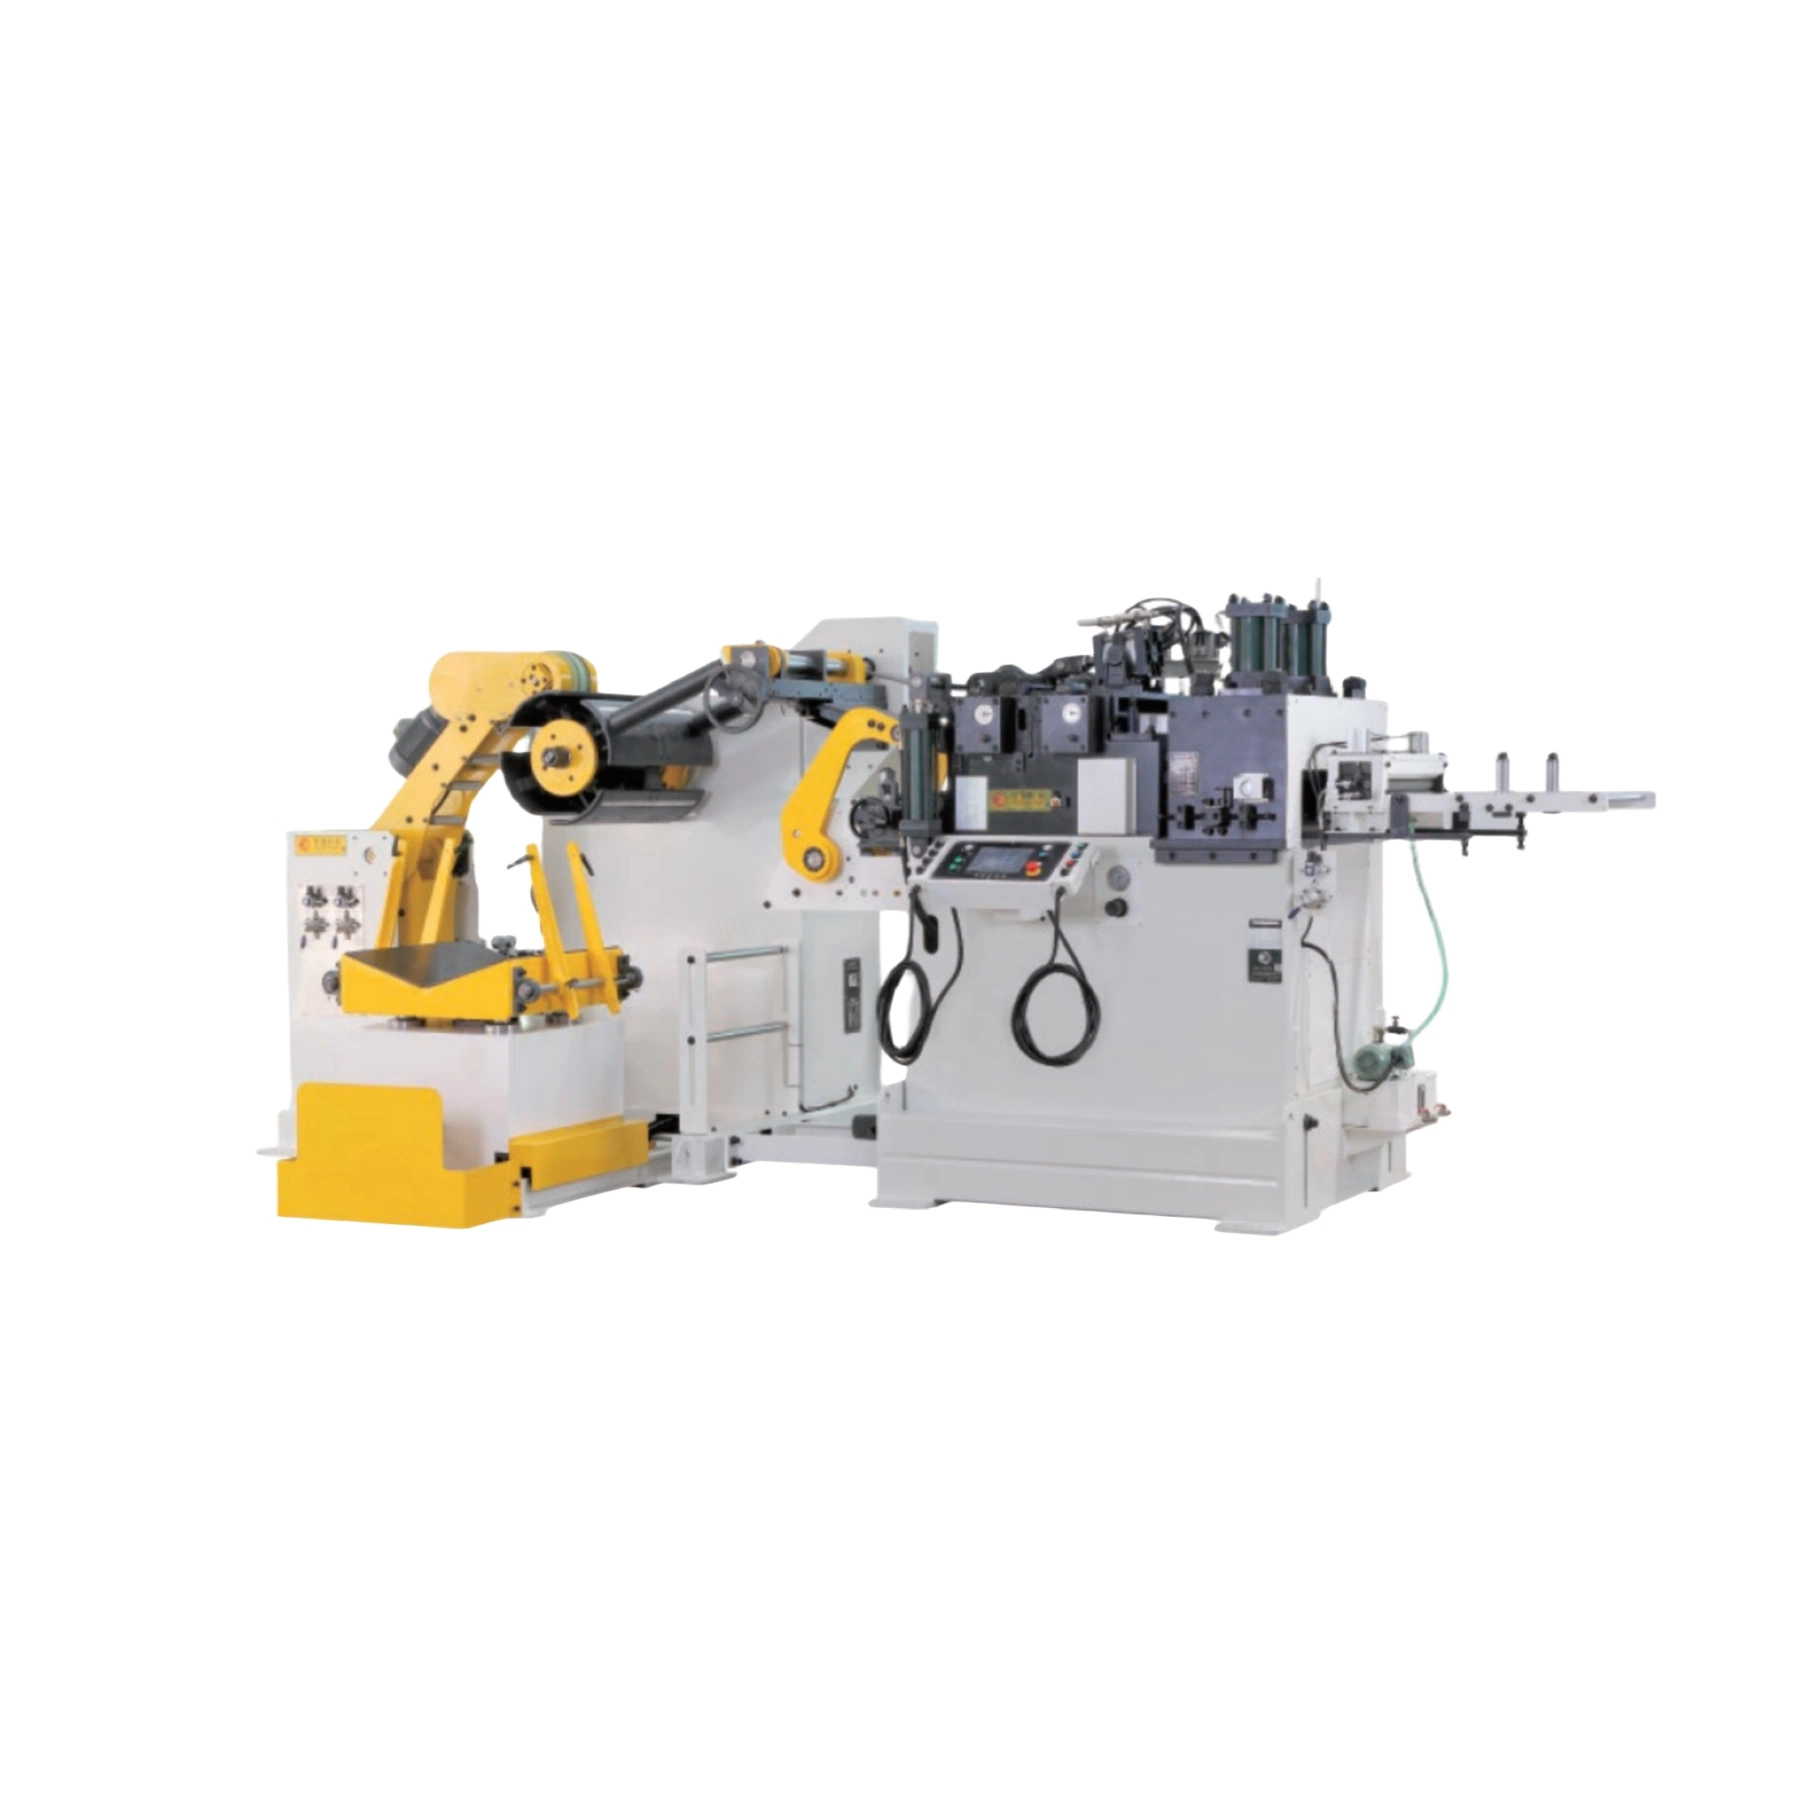 Thickness Coil 0.6-6.0mm Decoiler Straightener Nc Feeder Press Peripheral Equipment Uncoiling Straightening Leveling Machine